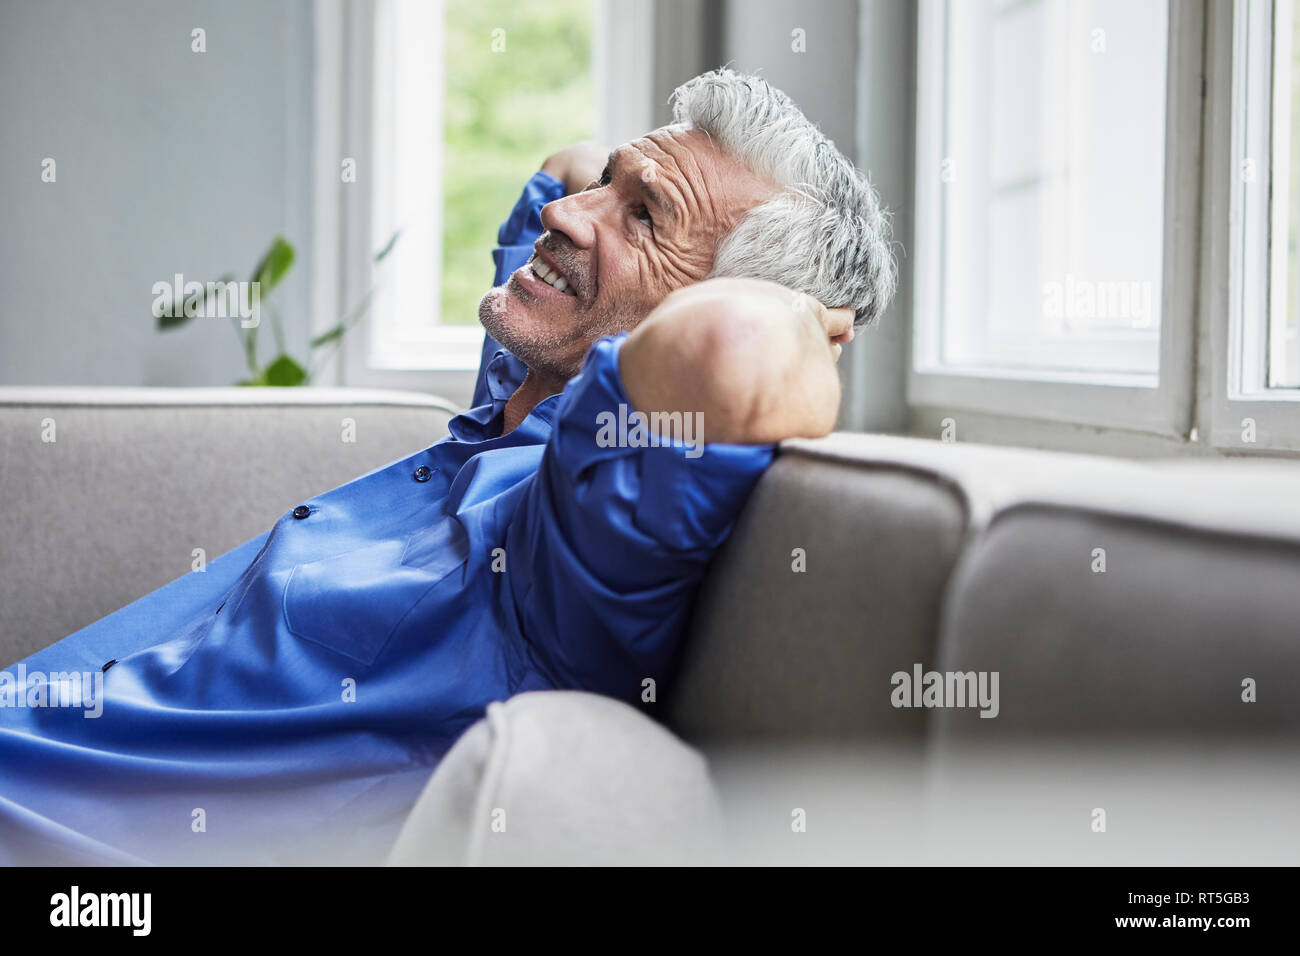 Relaxed mature man sitting on sofa at home Banque D'Images